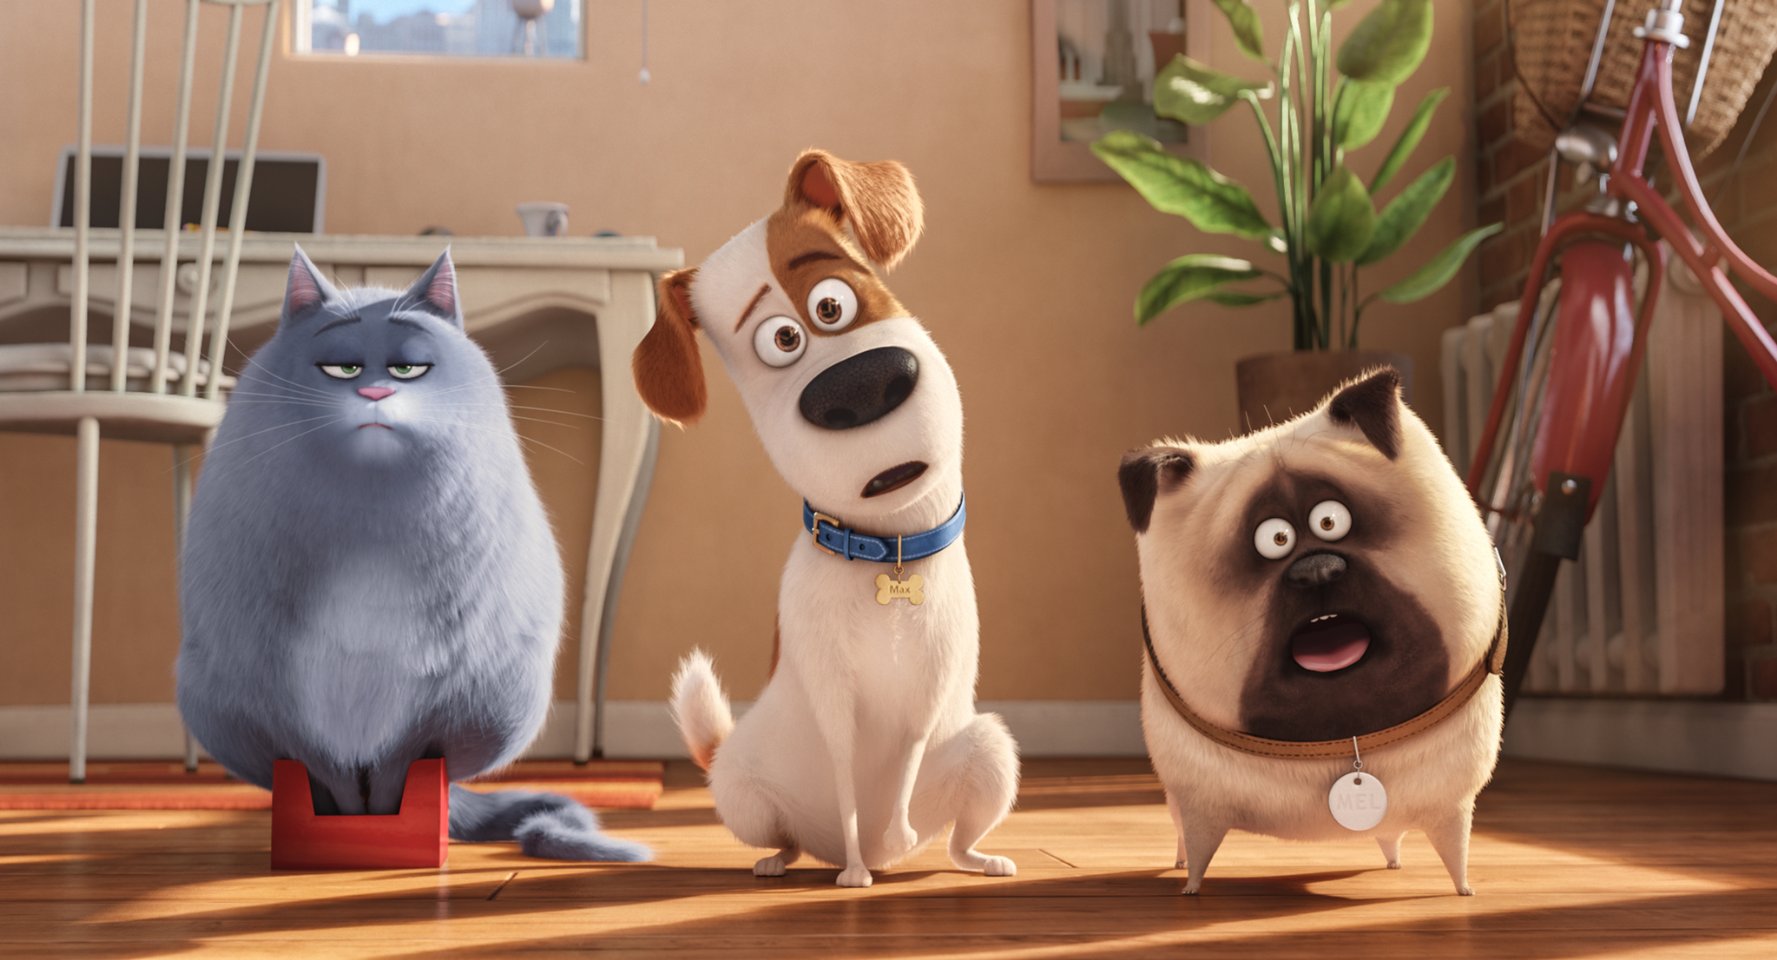 The Secret Life of Pets Blu-ray review